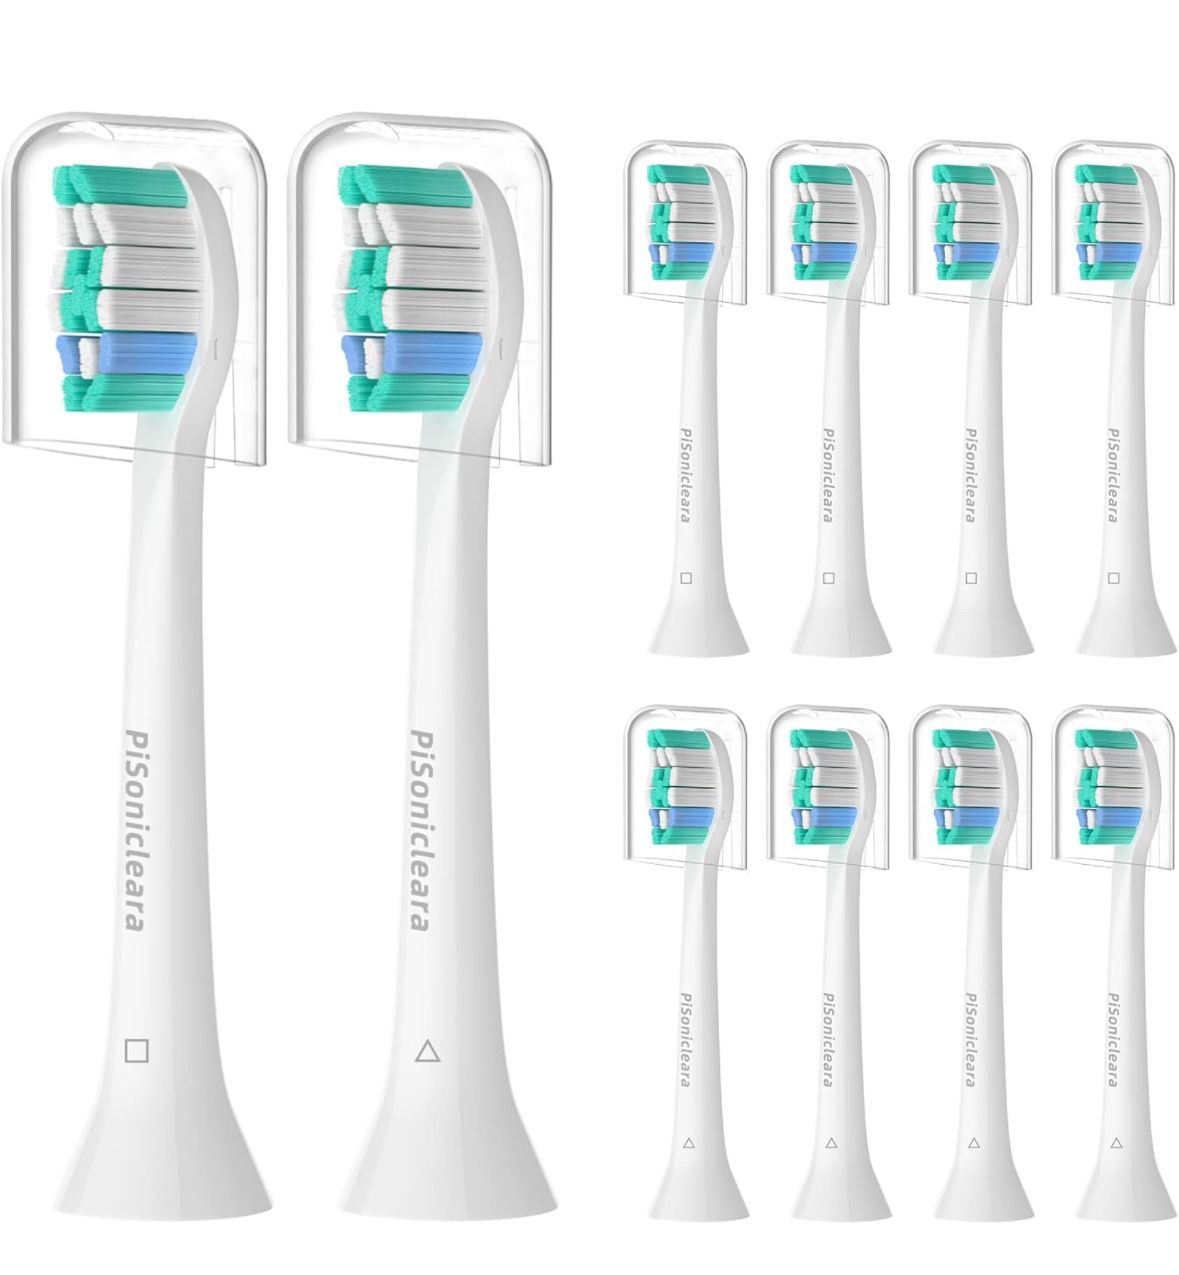 Toothbrush Heads for Philips 3qty